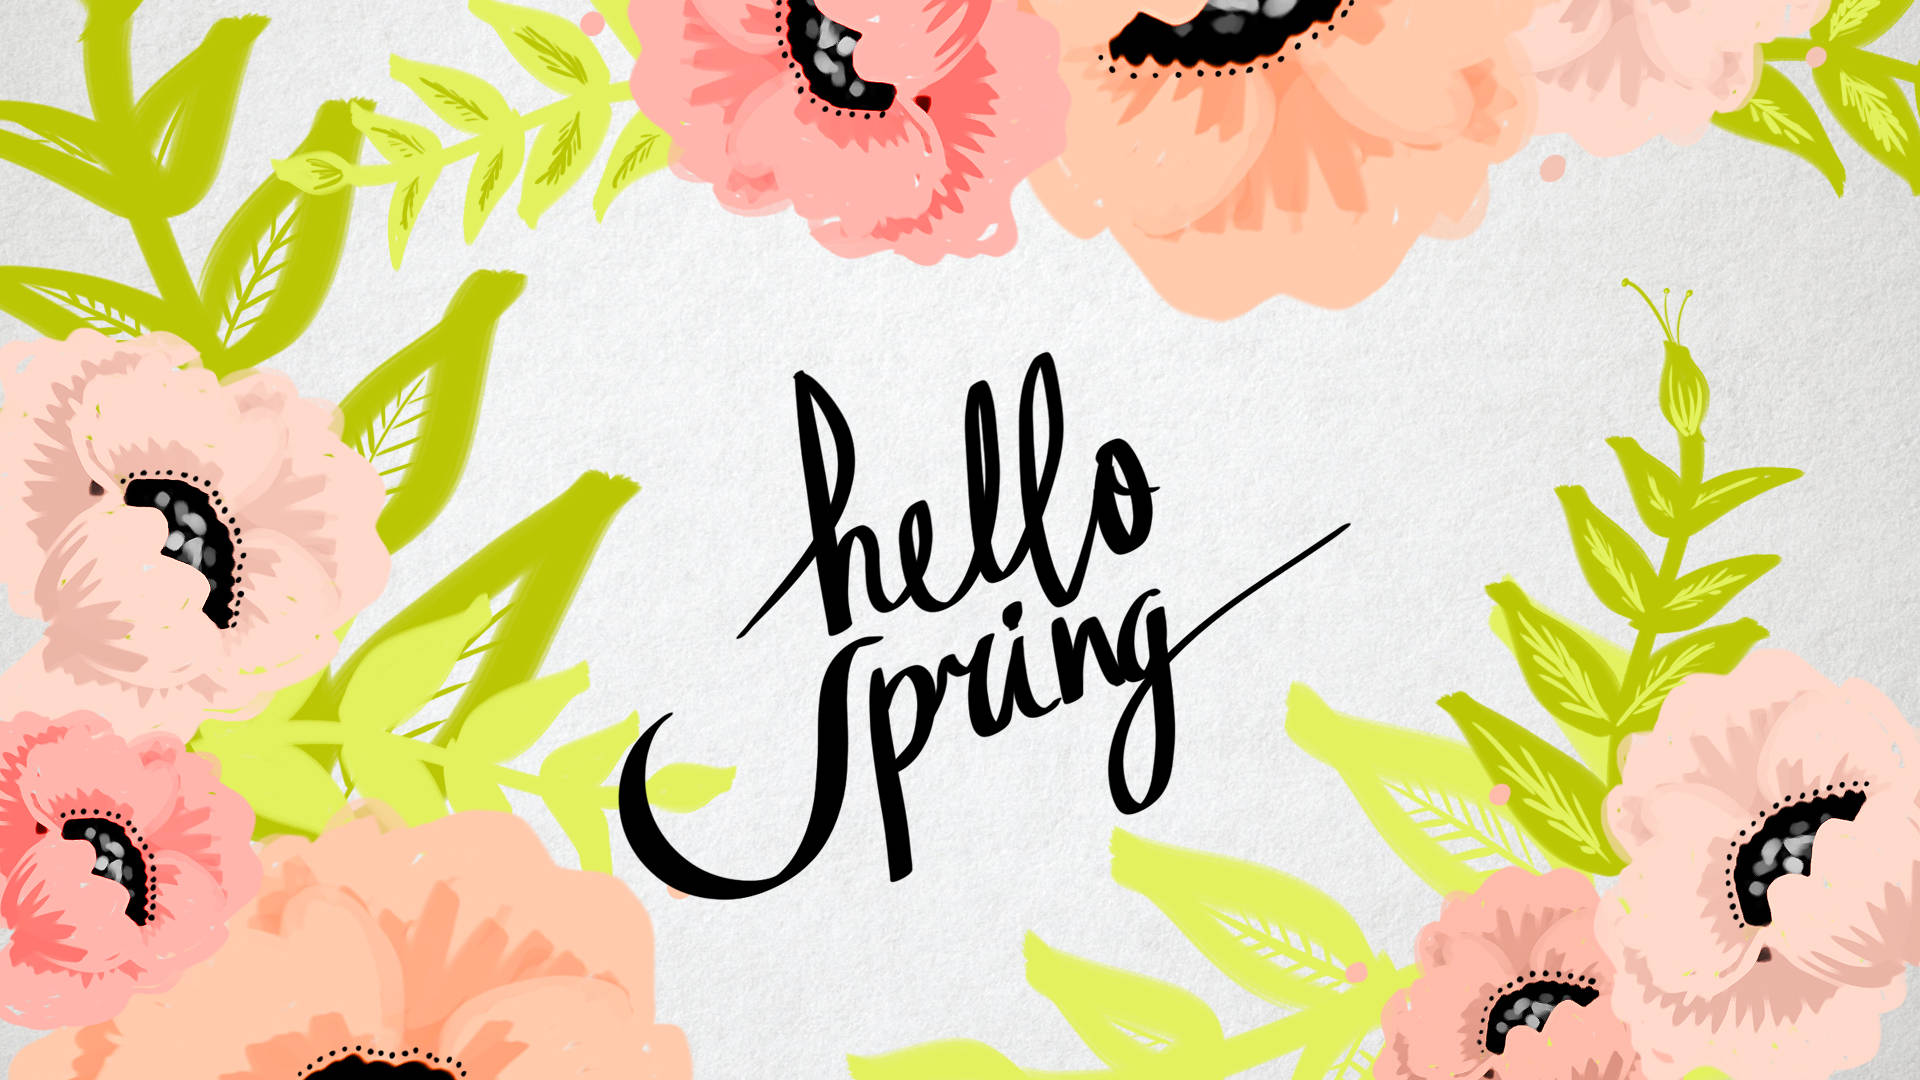 Free Cute Spring Wallpaper Downloads, Cute Spring Wallpaper for FREE